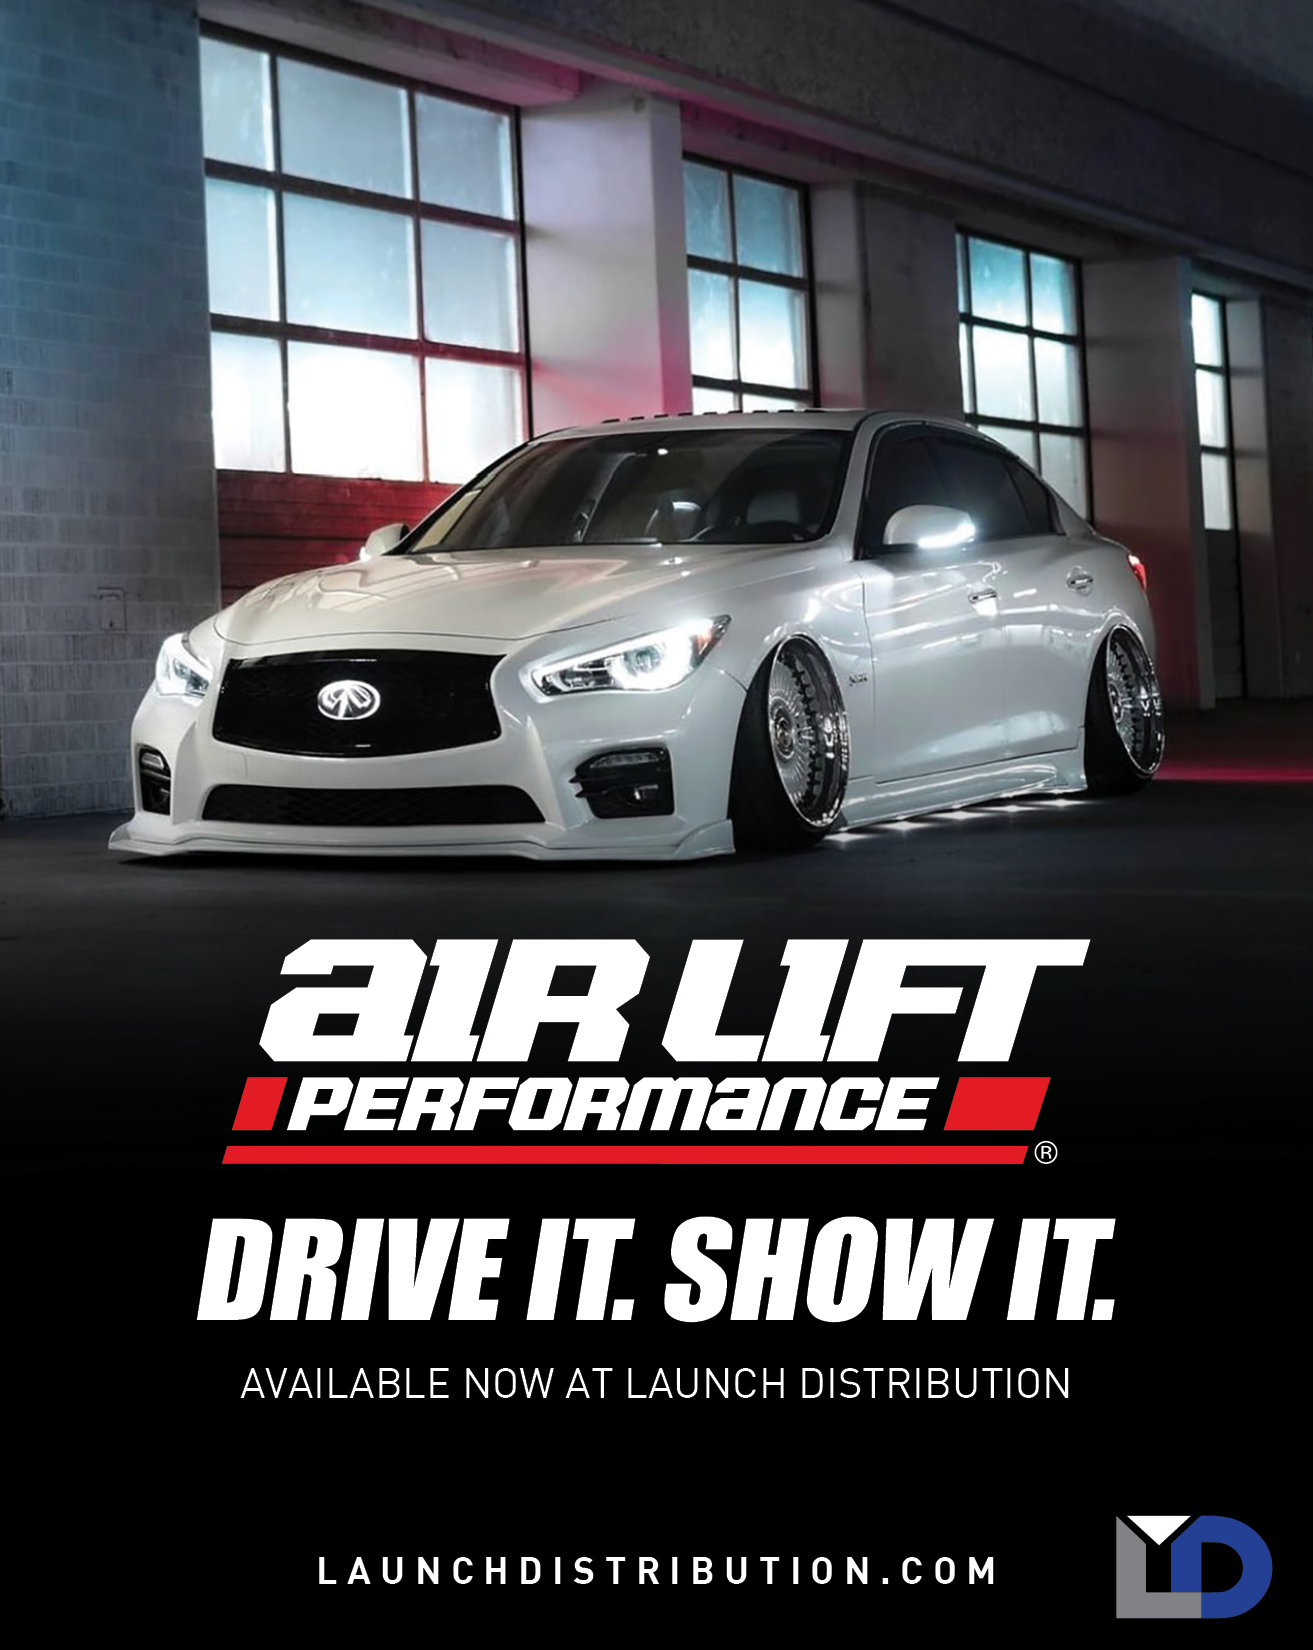 AirLift Performance Promotion!